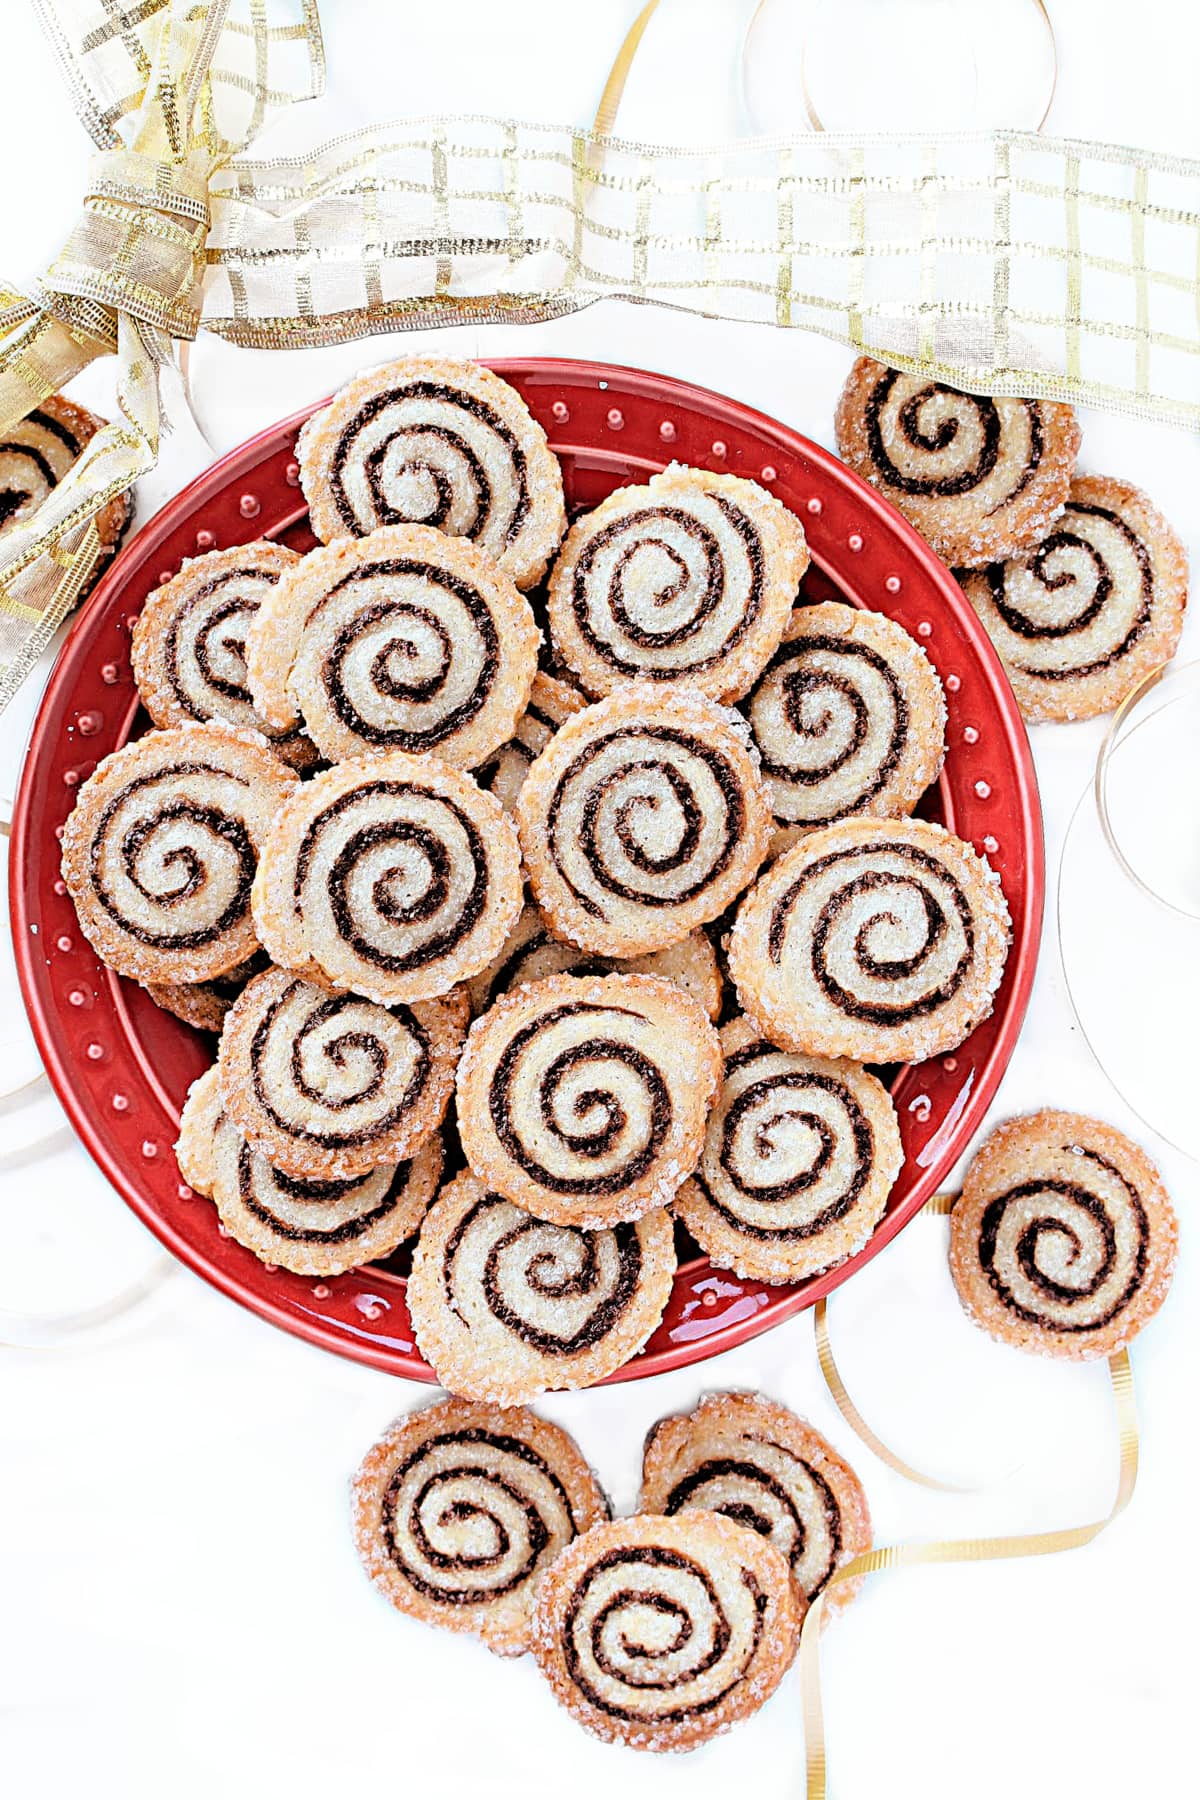 Golden brown cookies coated in sugar with a spiral of chocolate filling on a red plate.